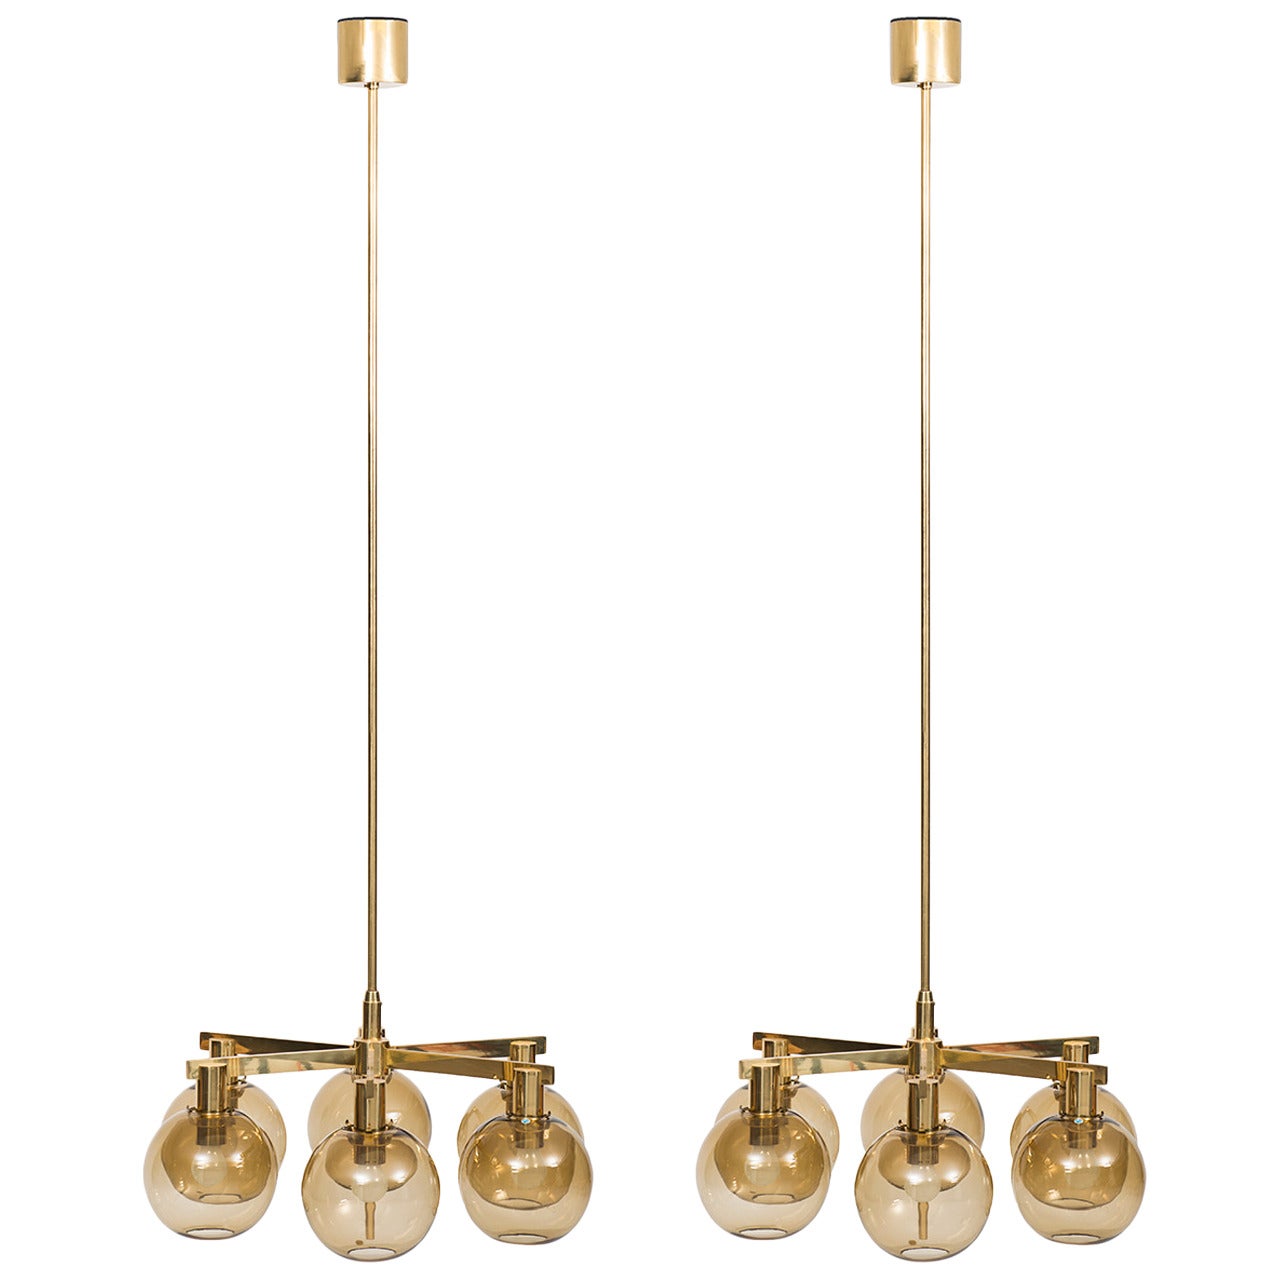 Hans-Agne Jakobsson Ceiling Lamps in Brass and Glass